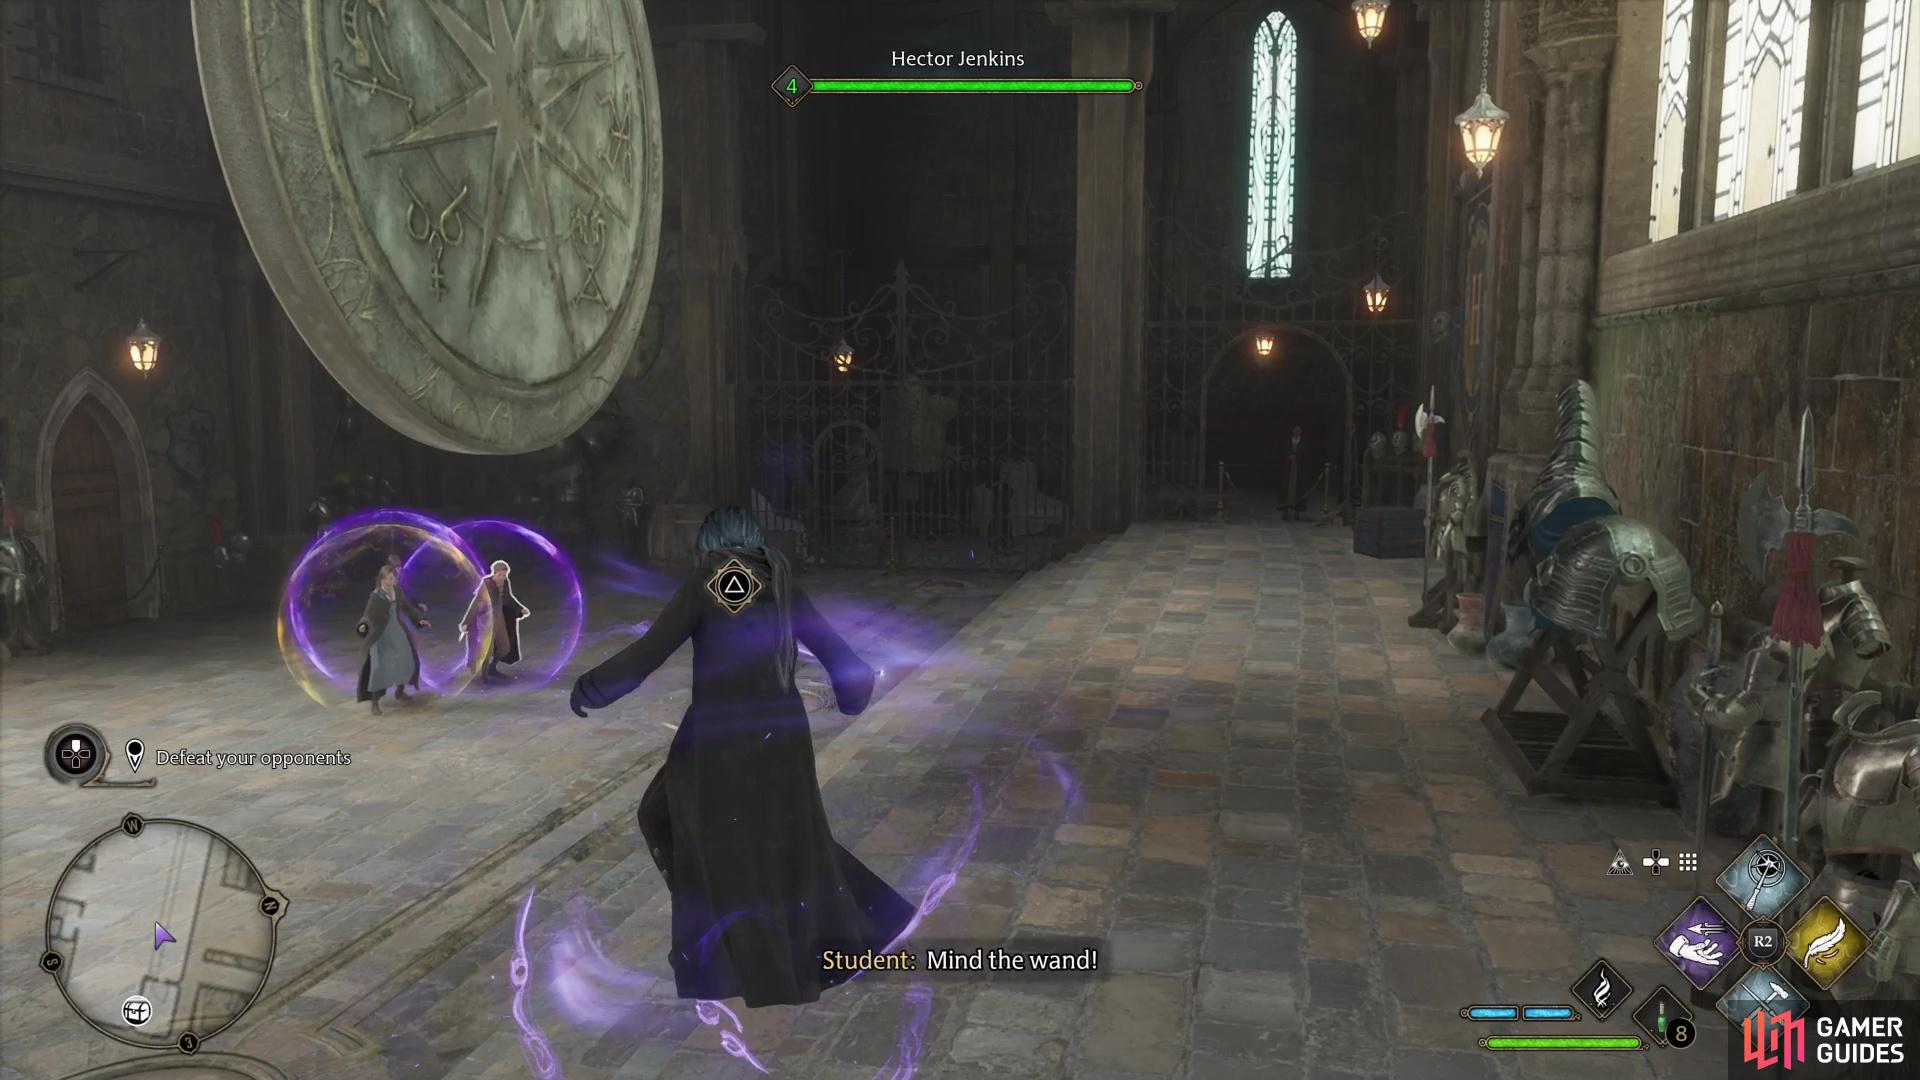 If enemies use advanced magics on you, quickly hit the button prompt to escape.